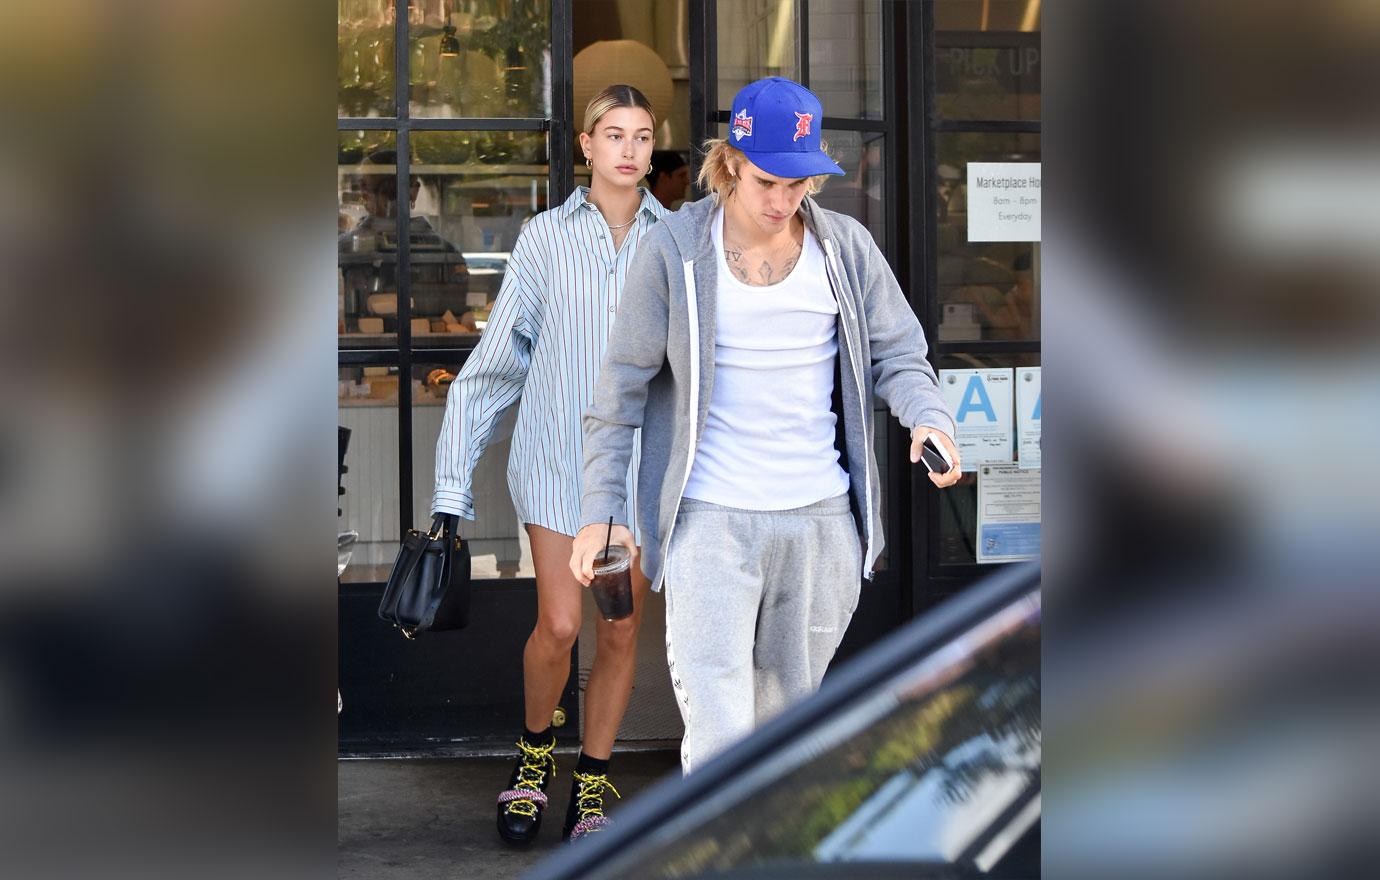 Hailey Baldwin Says Justin Bieber Kept Her In ‘weird Limbo Before Marriage